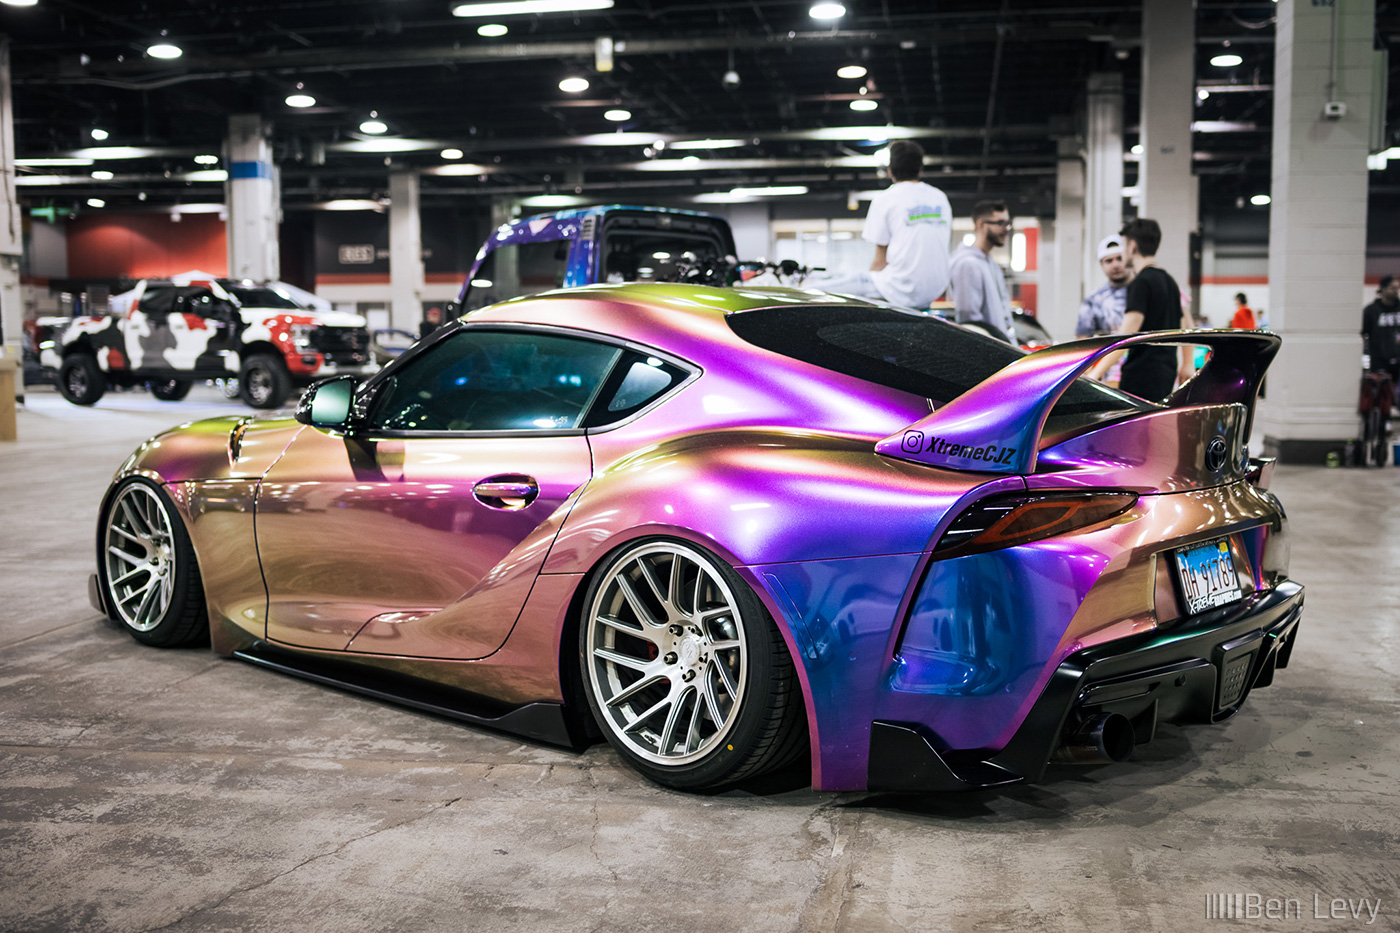 Bagged Toyota Supra with Wrap